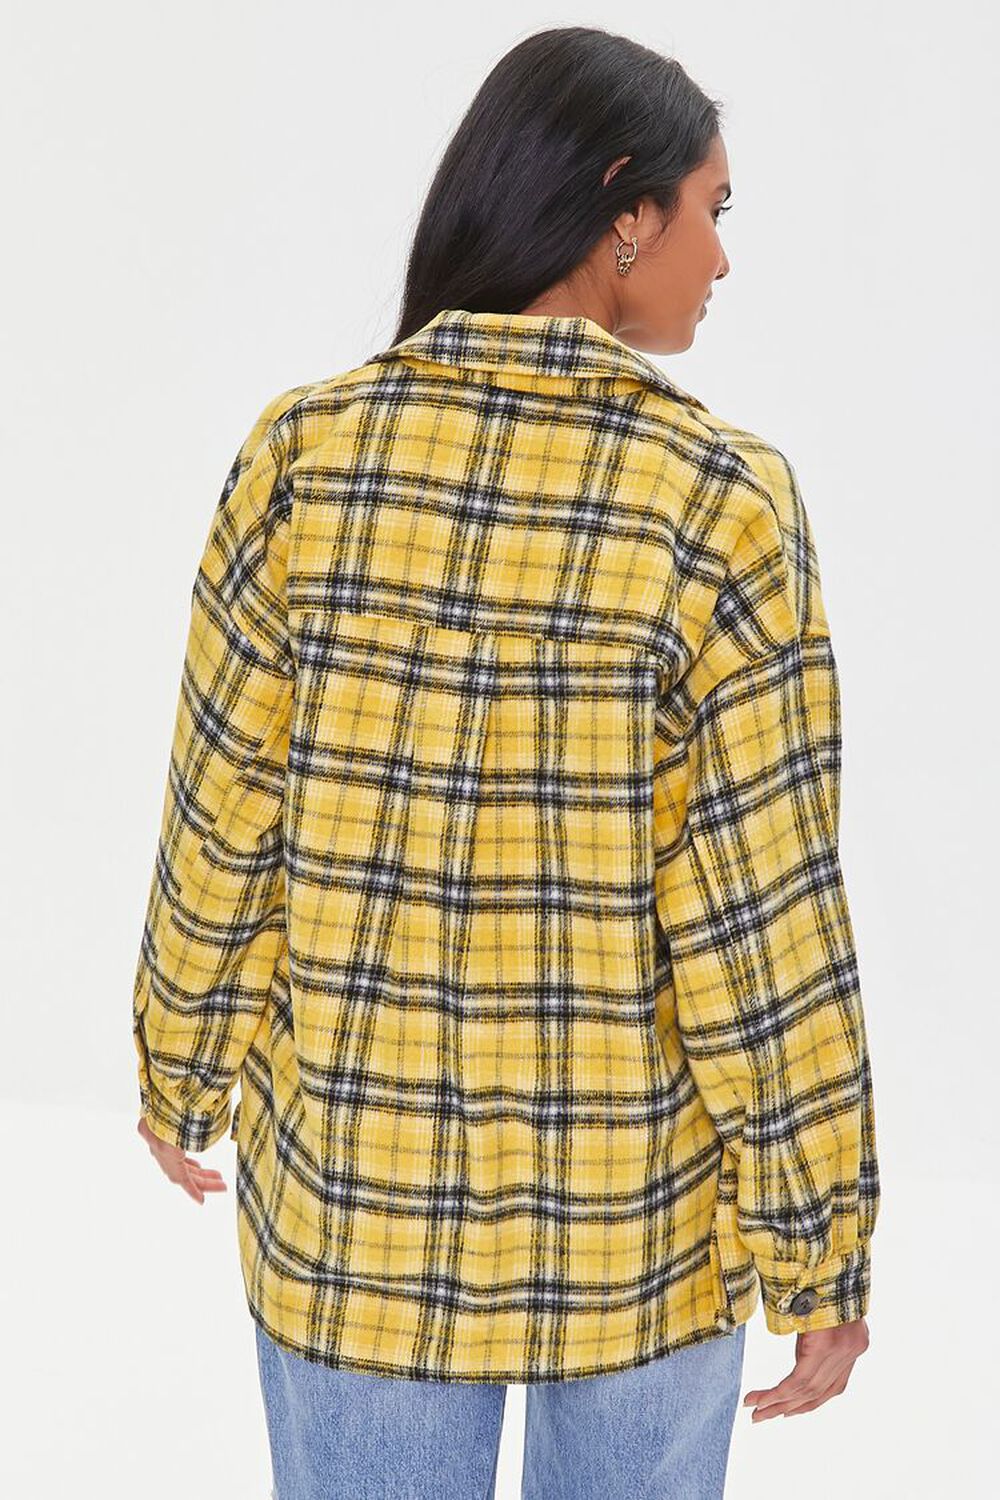 YELLOW/MULTI Plaid Button-Front Shacket, image 3